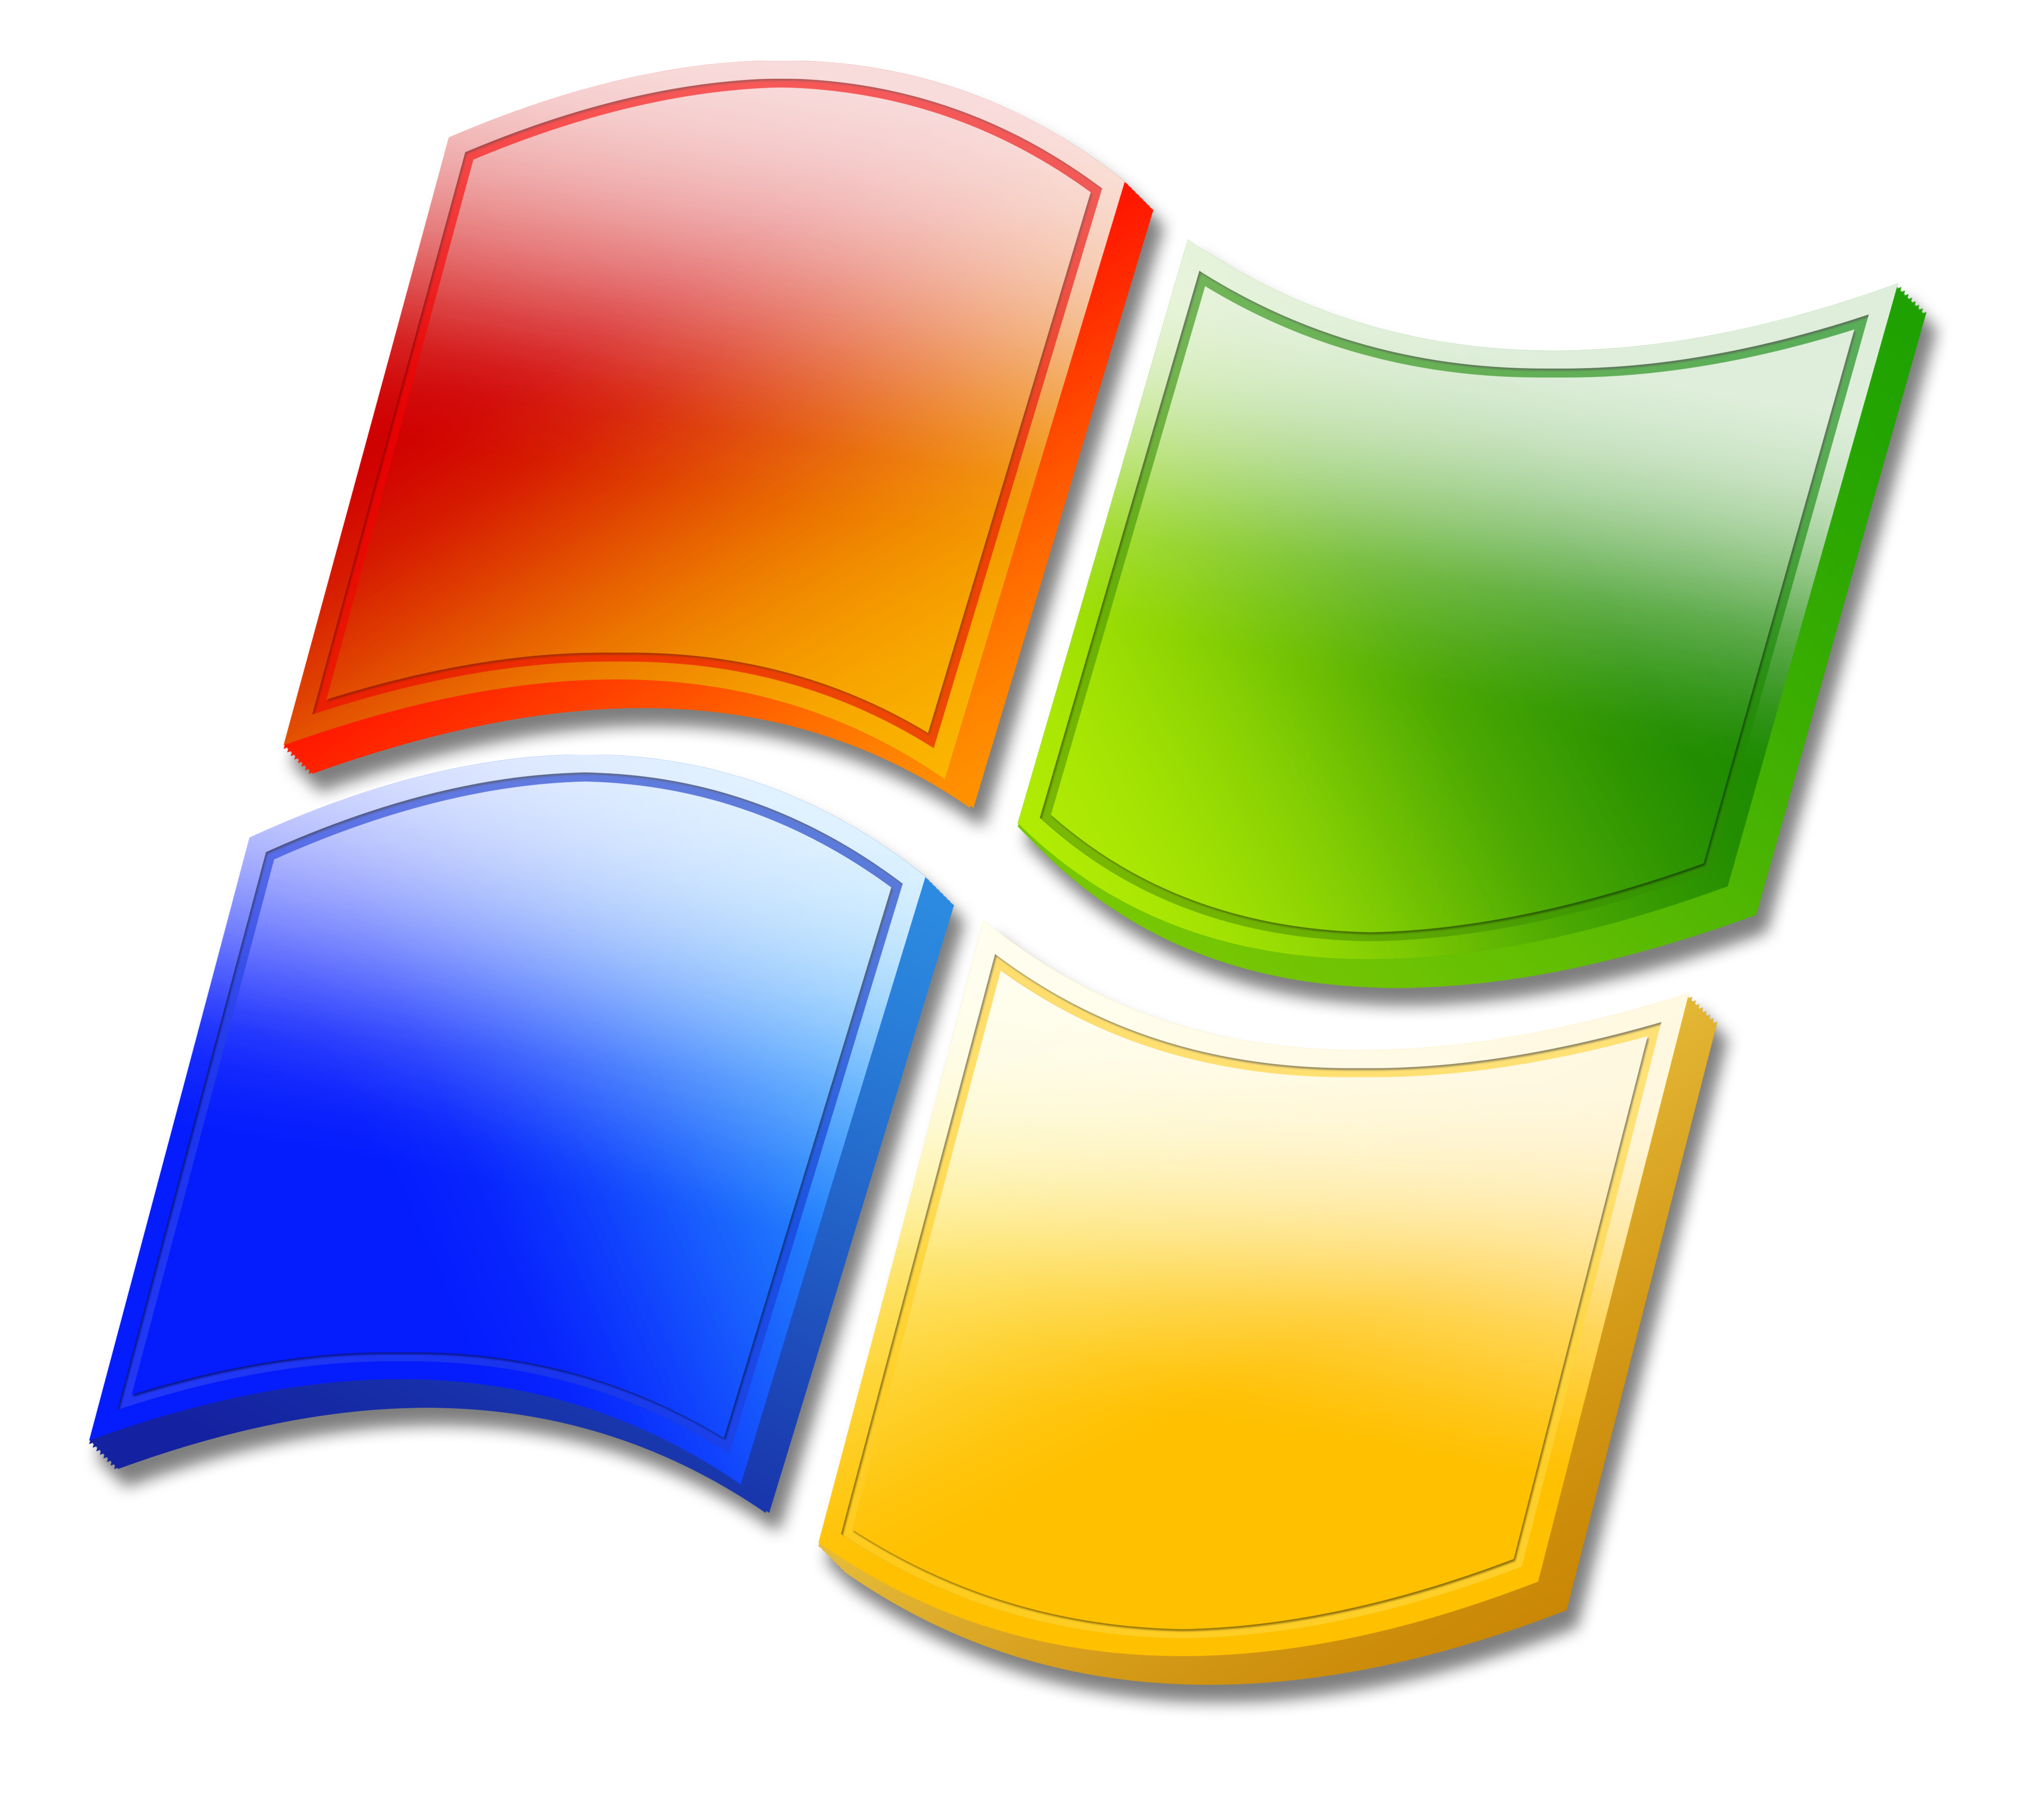 download clipart for windows 7 - photo #4